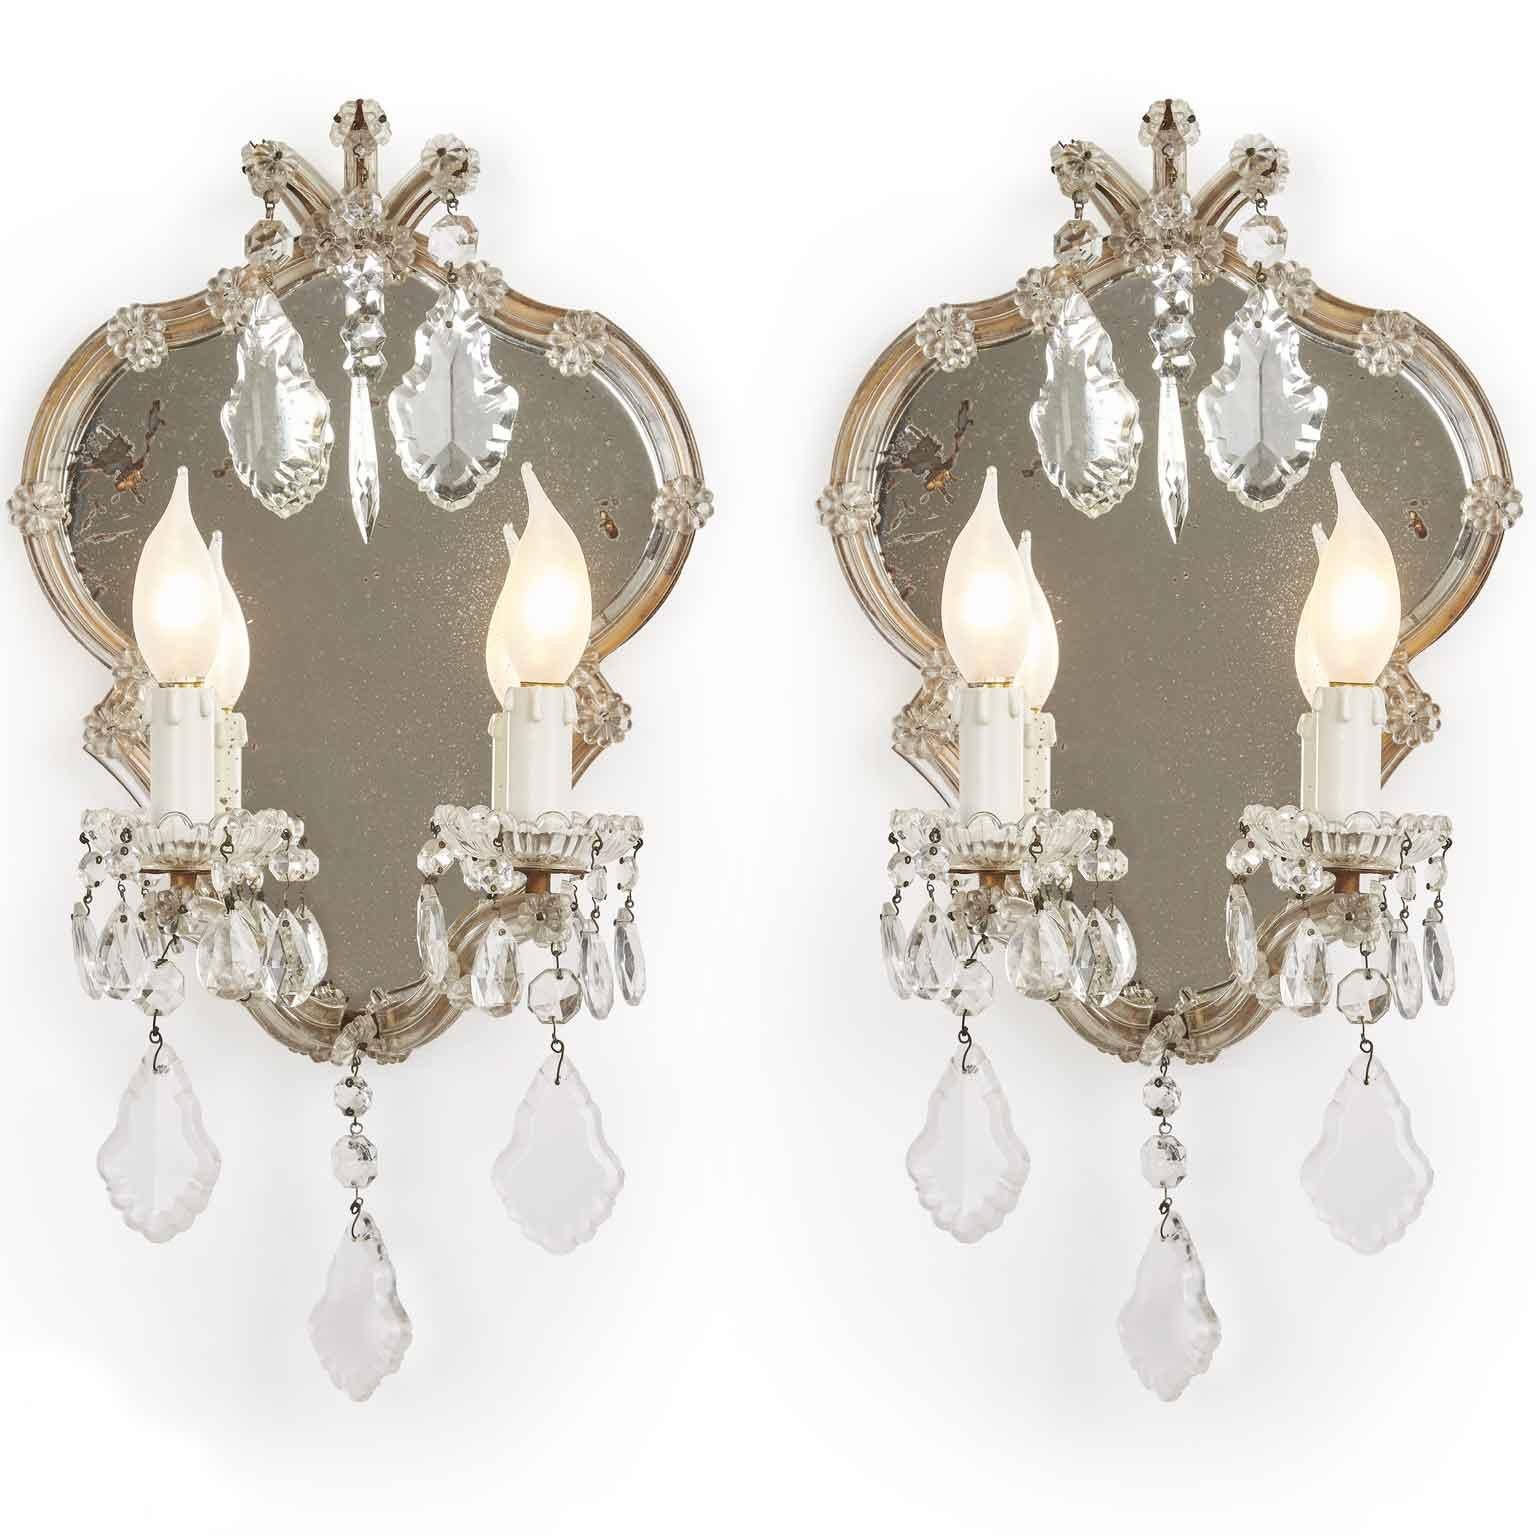 Faceted 20th Century Pair of Italian Crystal Sconces Hollywood Regency 1940s Wall Lights